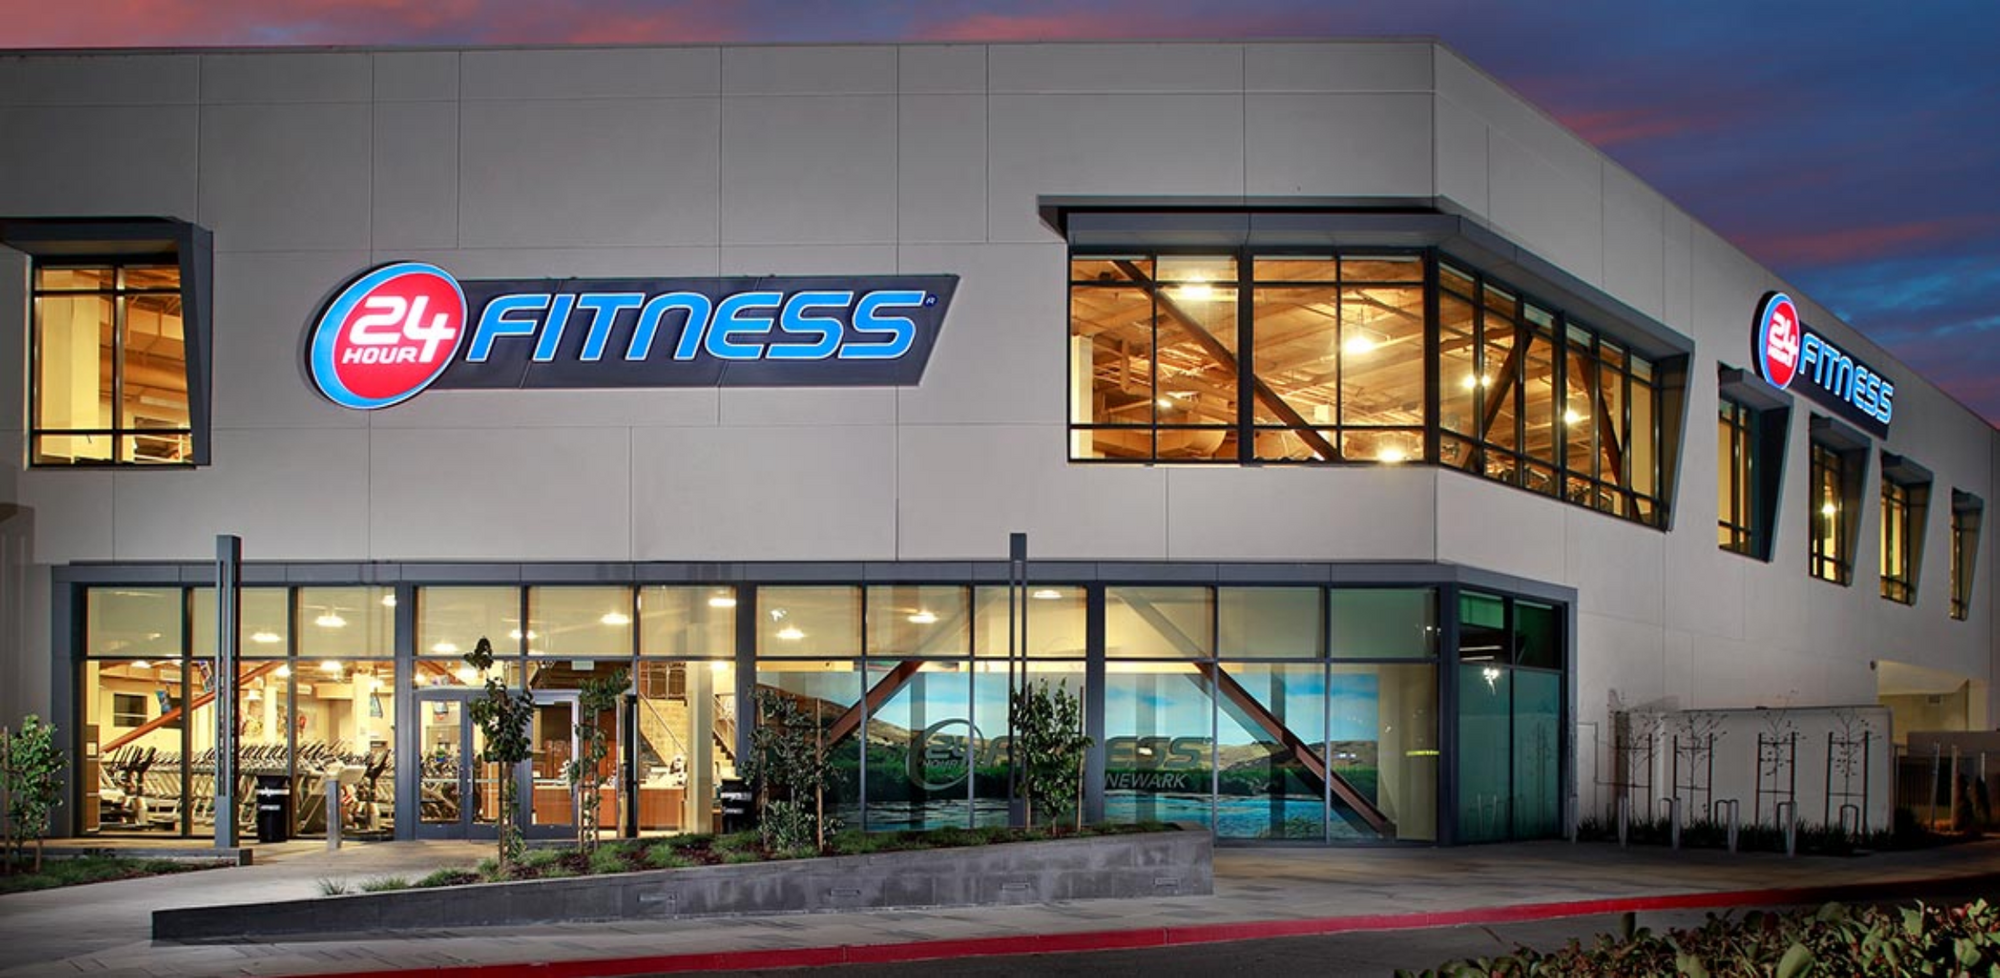 TV Screen Protection 24 Hour Fitness Gyms US